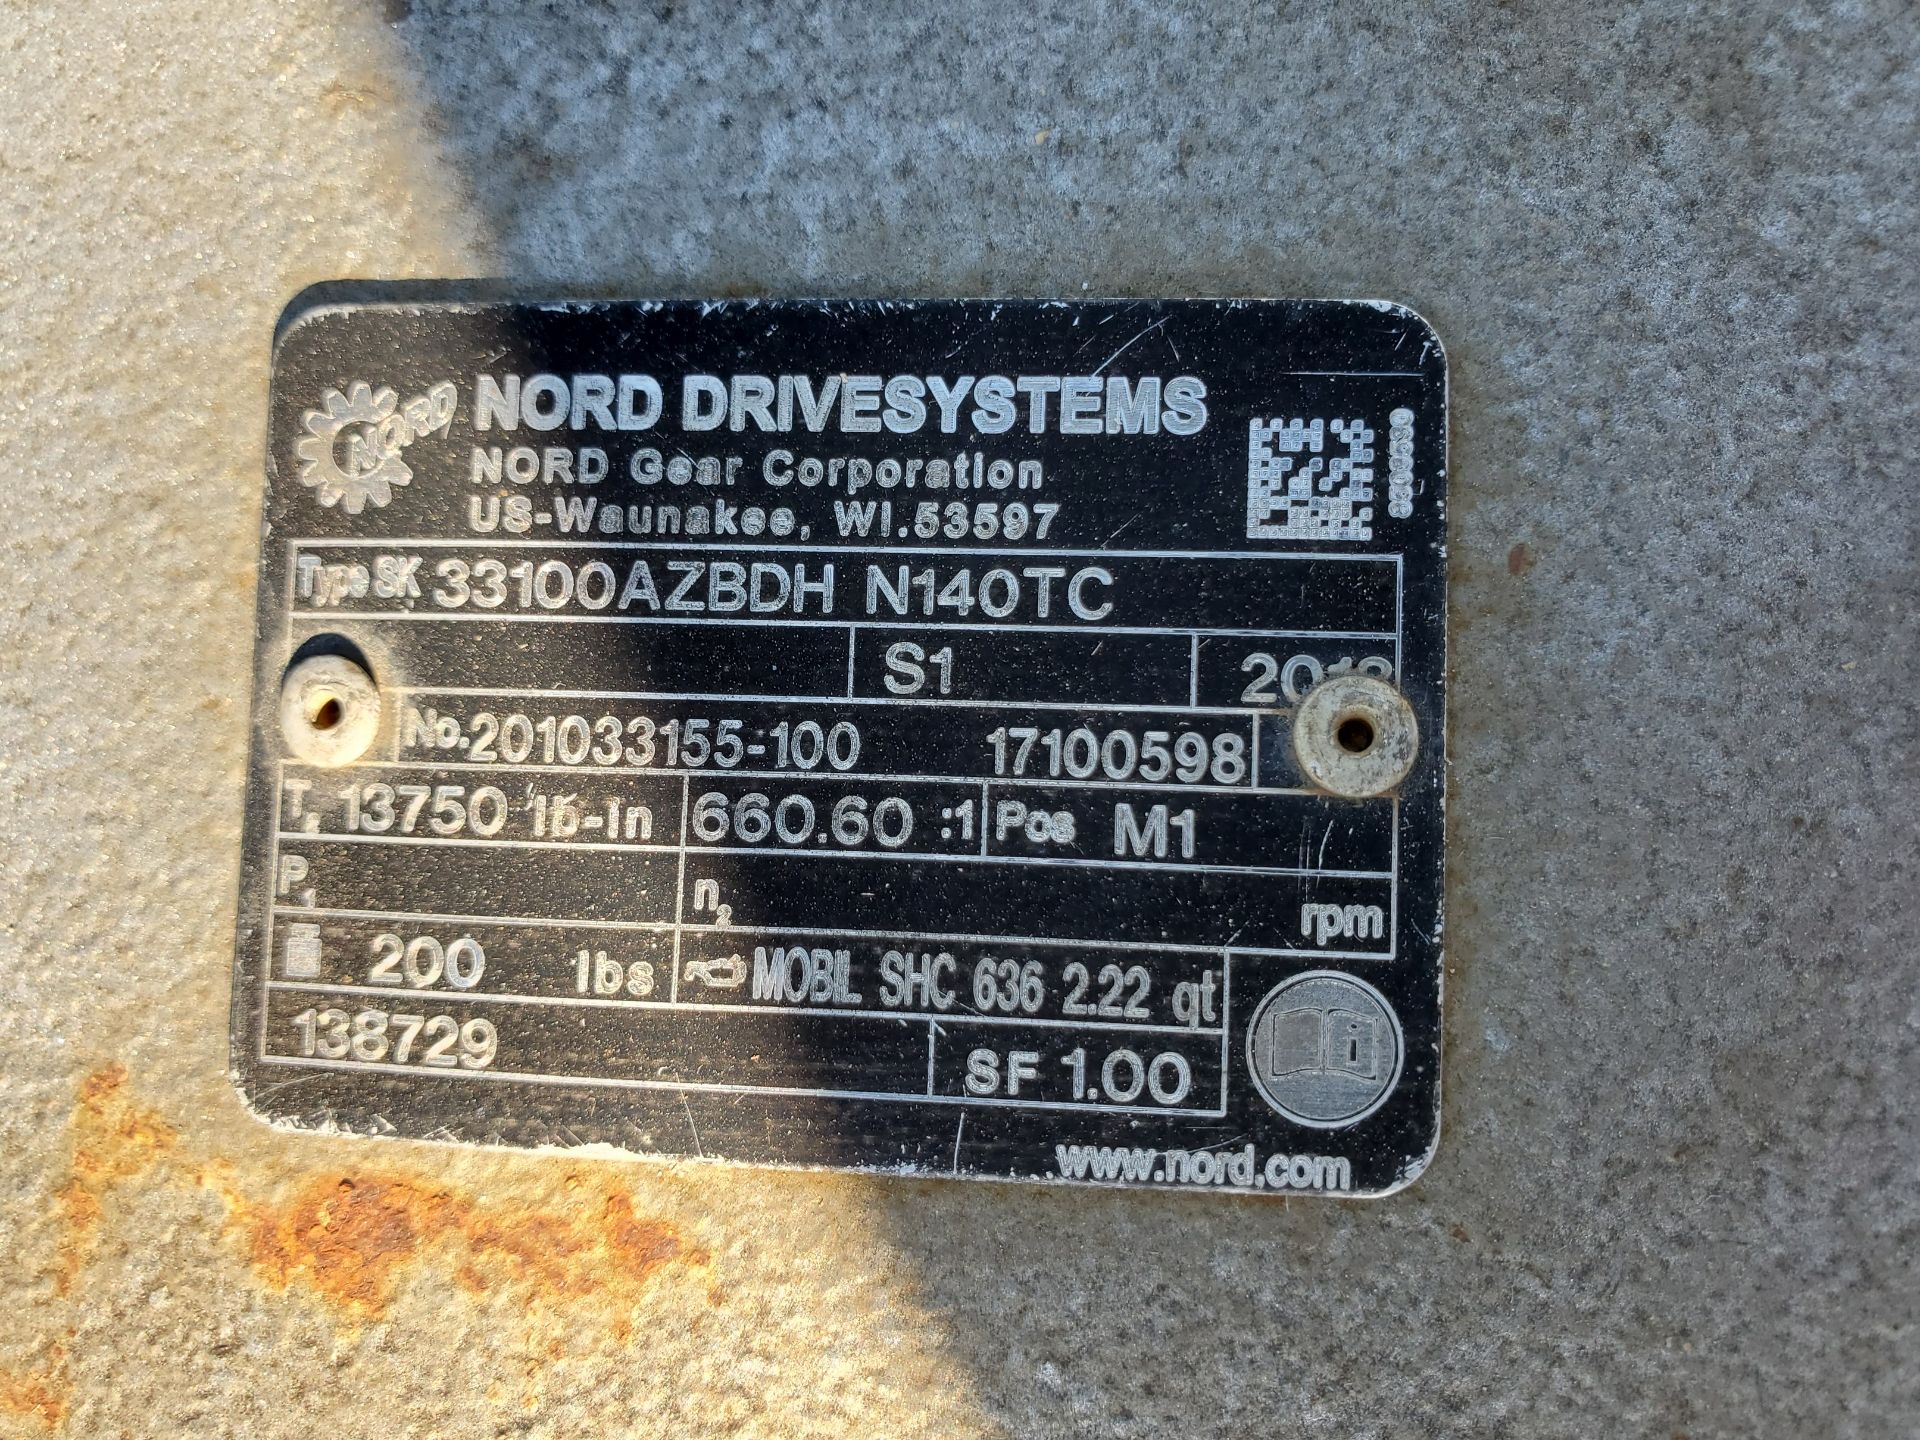 (4) NORD DRIVESYSTEMS 25.39:1 GEAR REDUCERS WITH GE 1 HP ELECTRIC MOTORS - Image 6 of 9